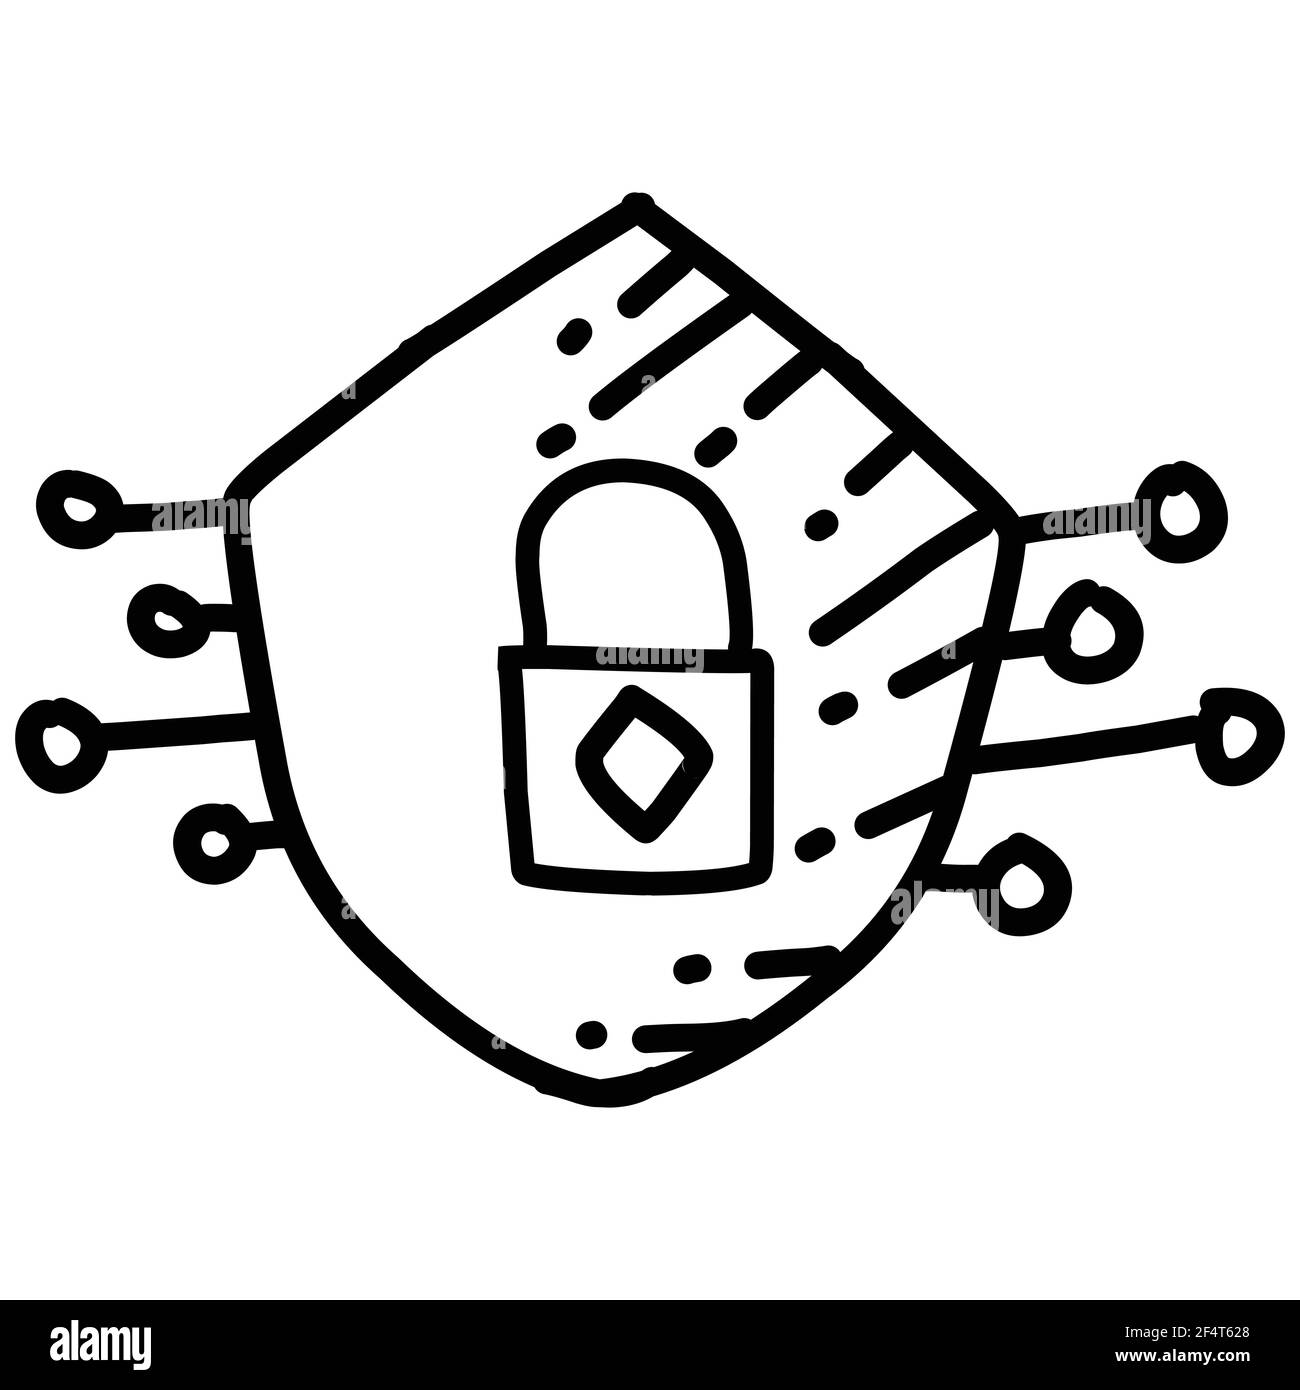 Business safety hand drawn icon design, outline black, doodle icon, vector icon Stock Vector